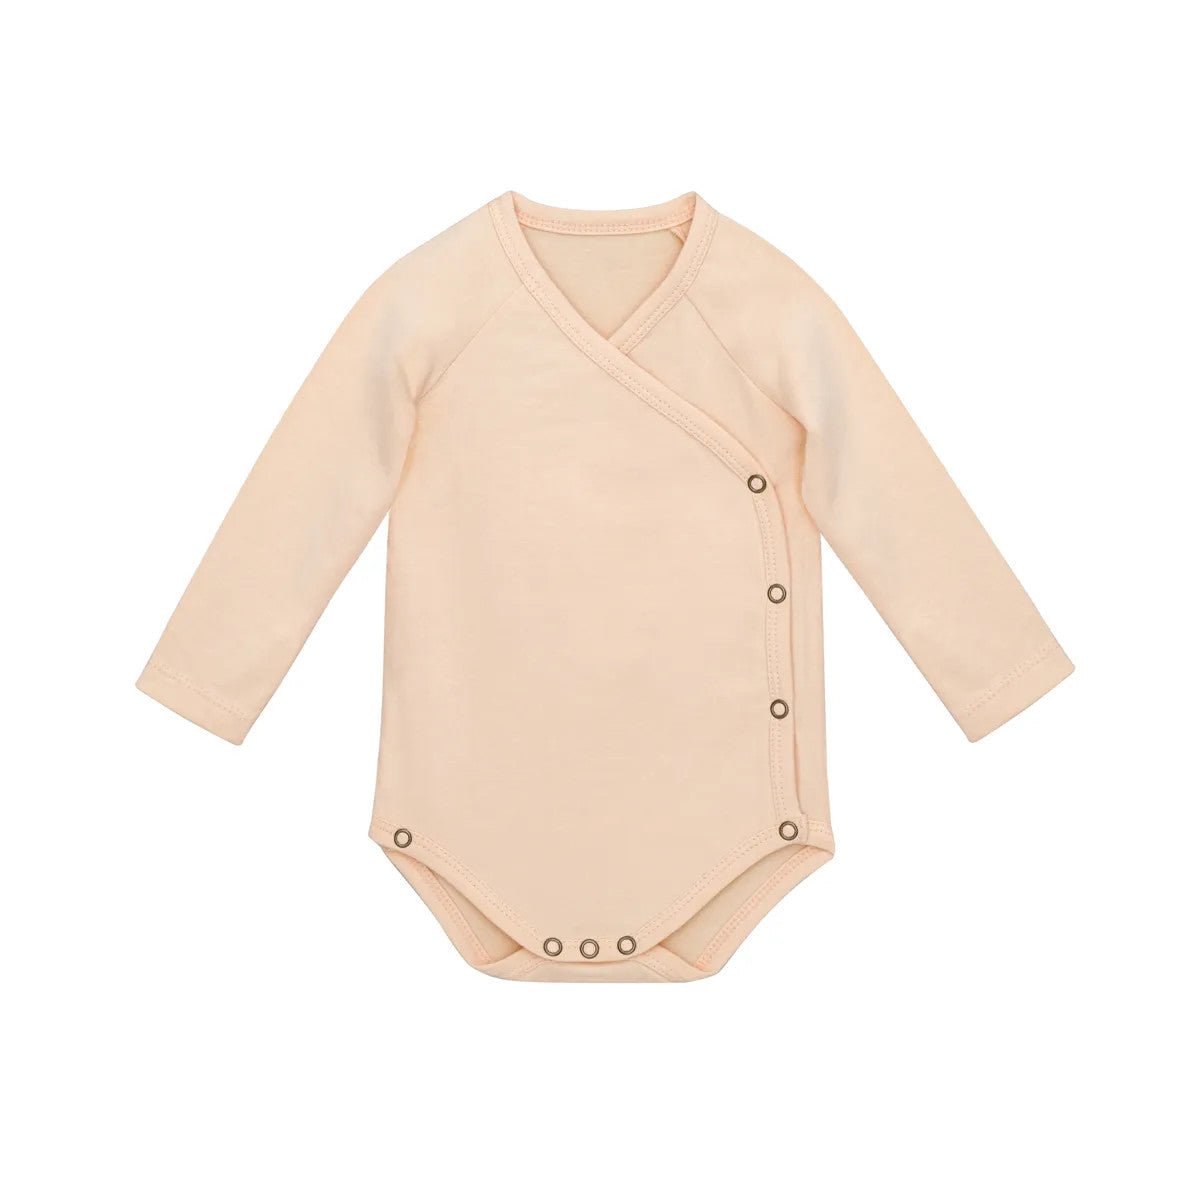 Little Hedonist unisex organic cotton baby onesie (body / romper) made from our signature organic cotton, in little peach color.